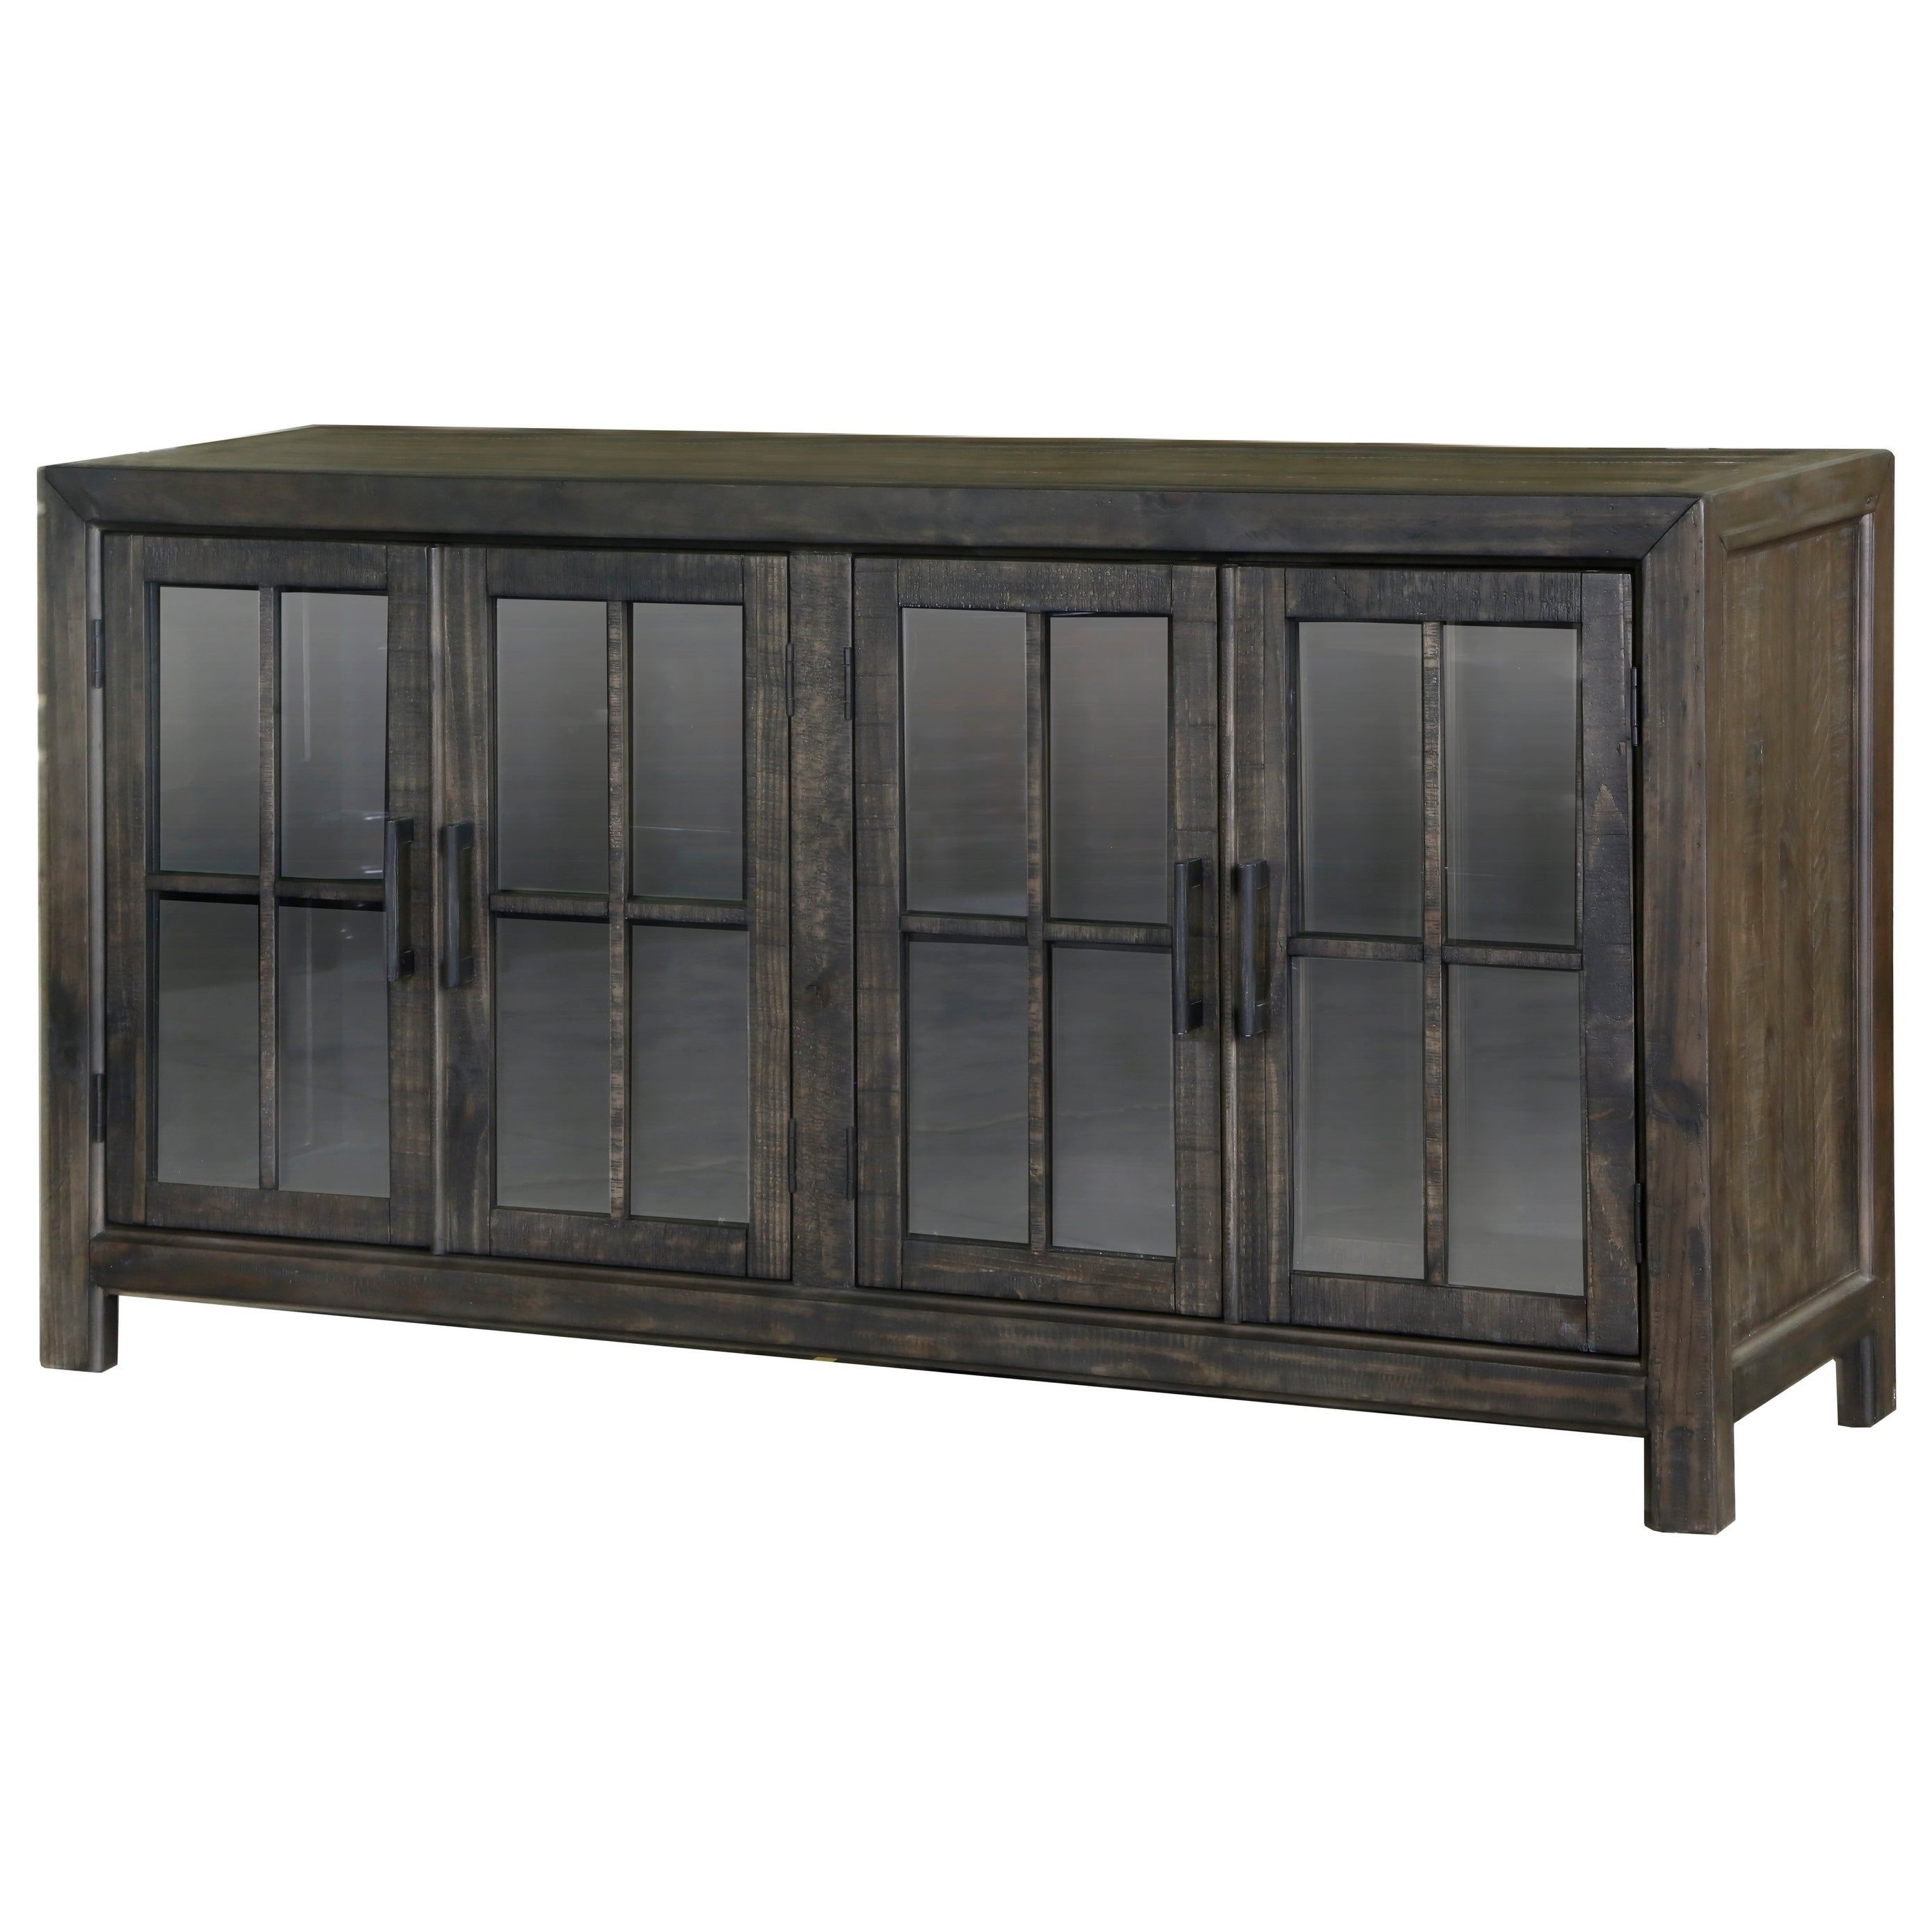 The Gray Barn Kornfeld Wood Buffet Curio With Regard To Wooden Curio Buffets With Two Glass Doors (View 11 of 30)